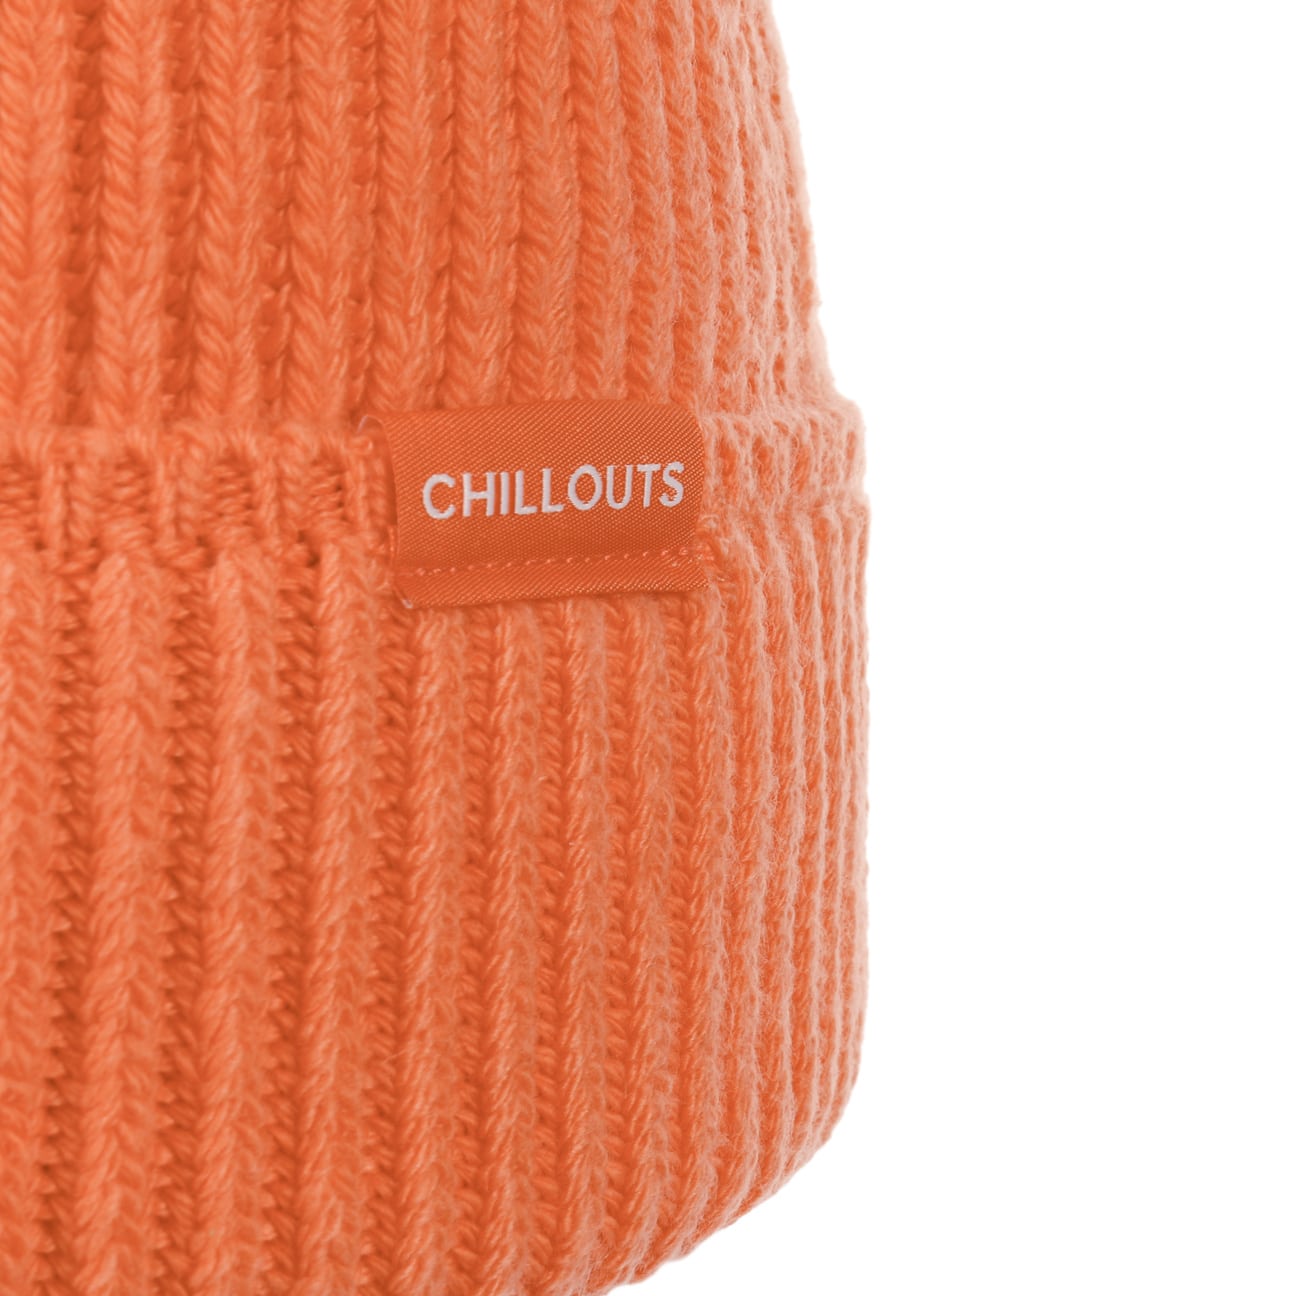 Meets 29,99 Chillouts € Cotton - Umschlagmütze by Wool